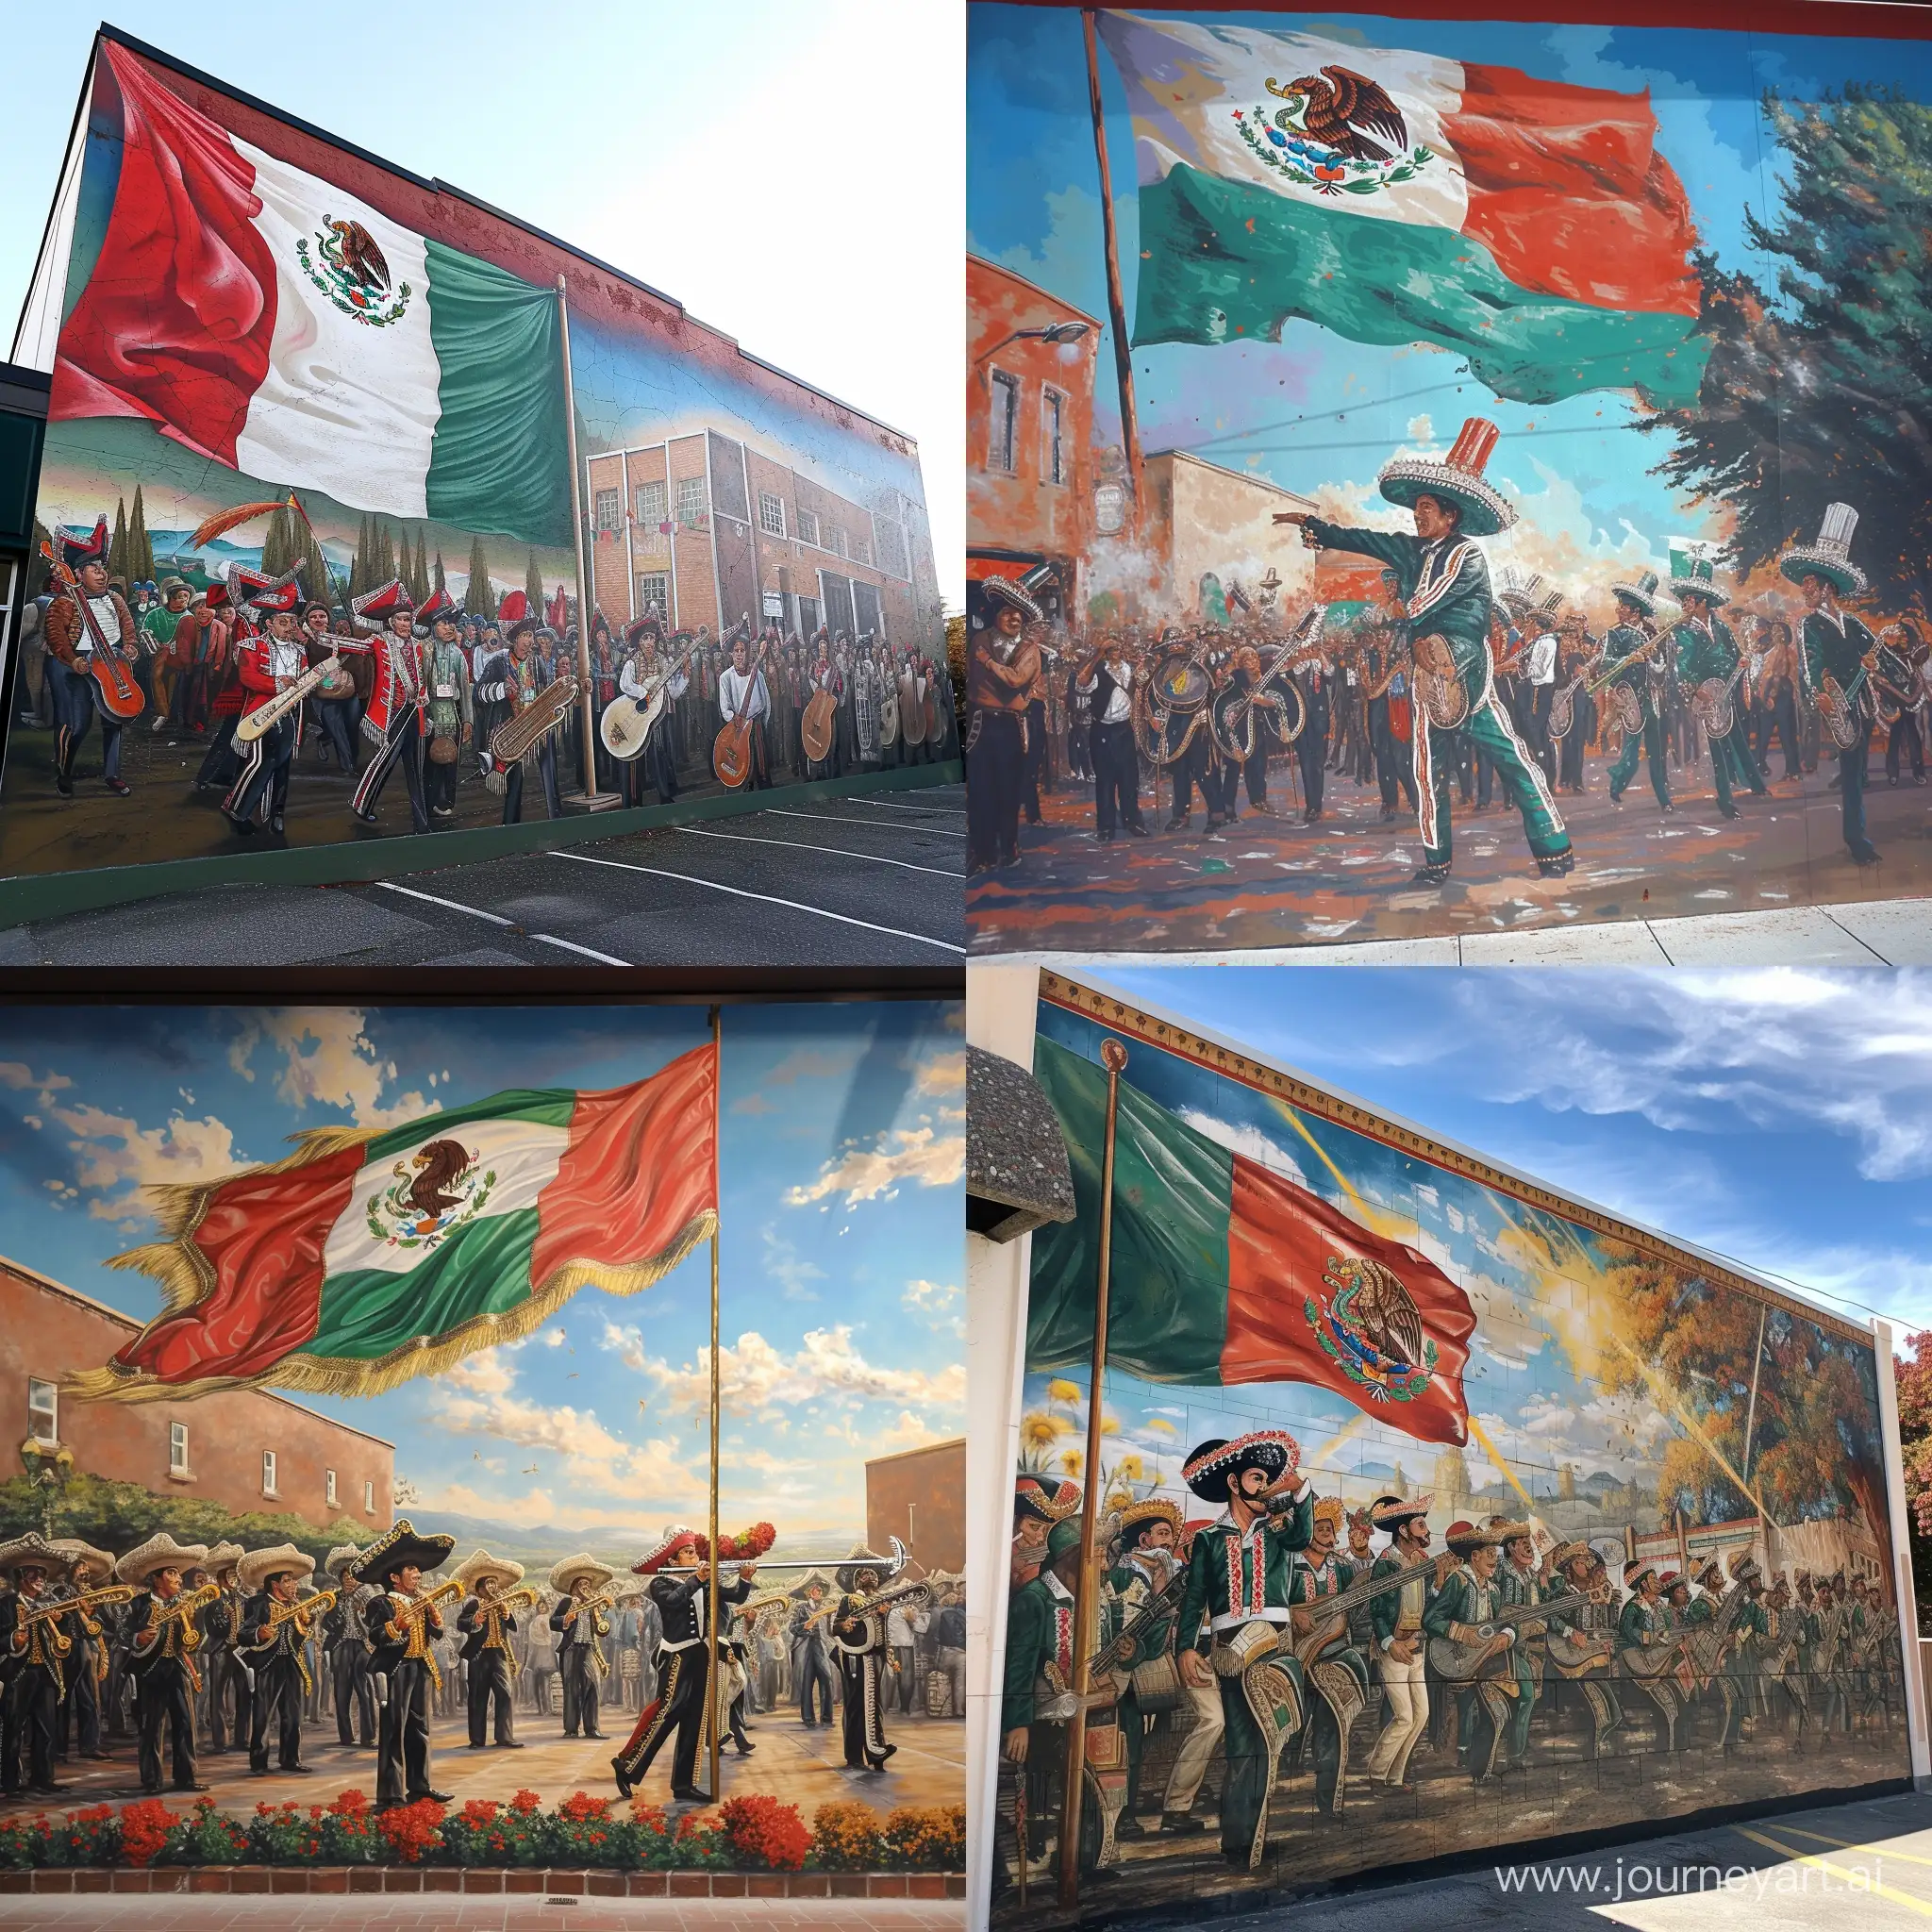 Mural on mexican immigrants in washington state. Include the mexican flag and mariachi bands